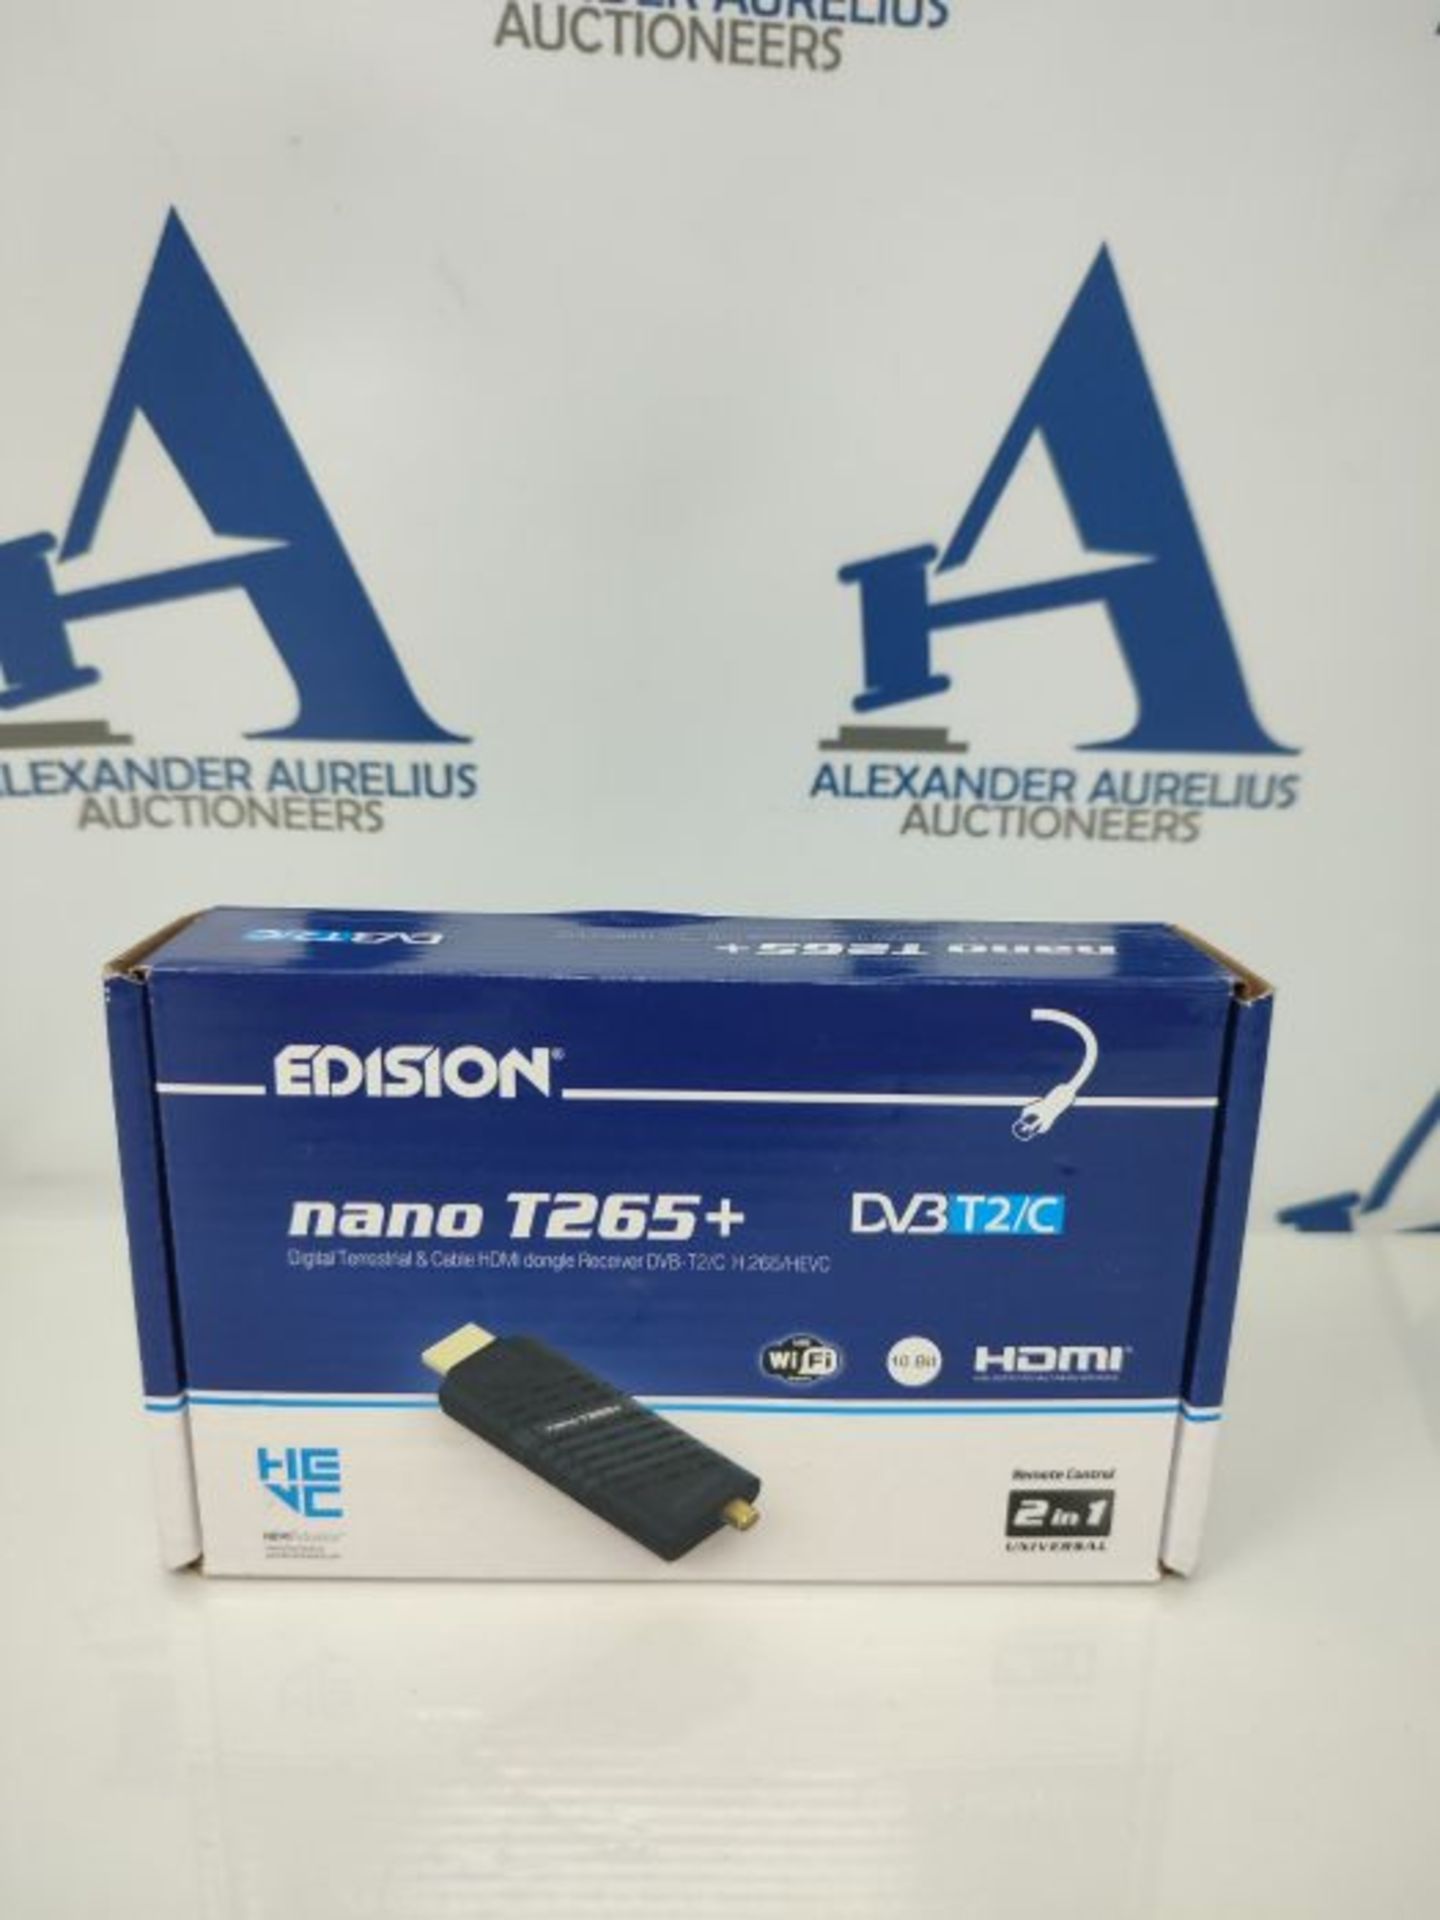 Edision NANO T265+ Terrestrial and Cable HDMI dongle Receiver, DVB-T2/C, H265 HEVC, FT - Image 2 of 3